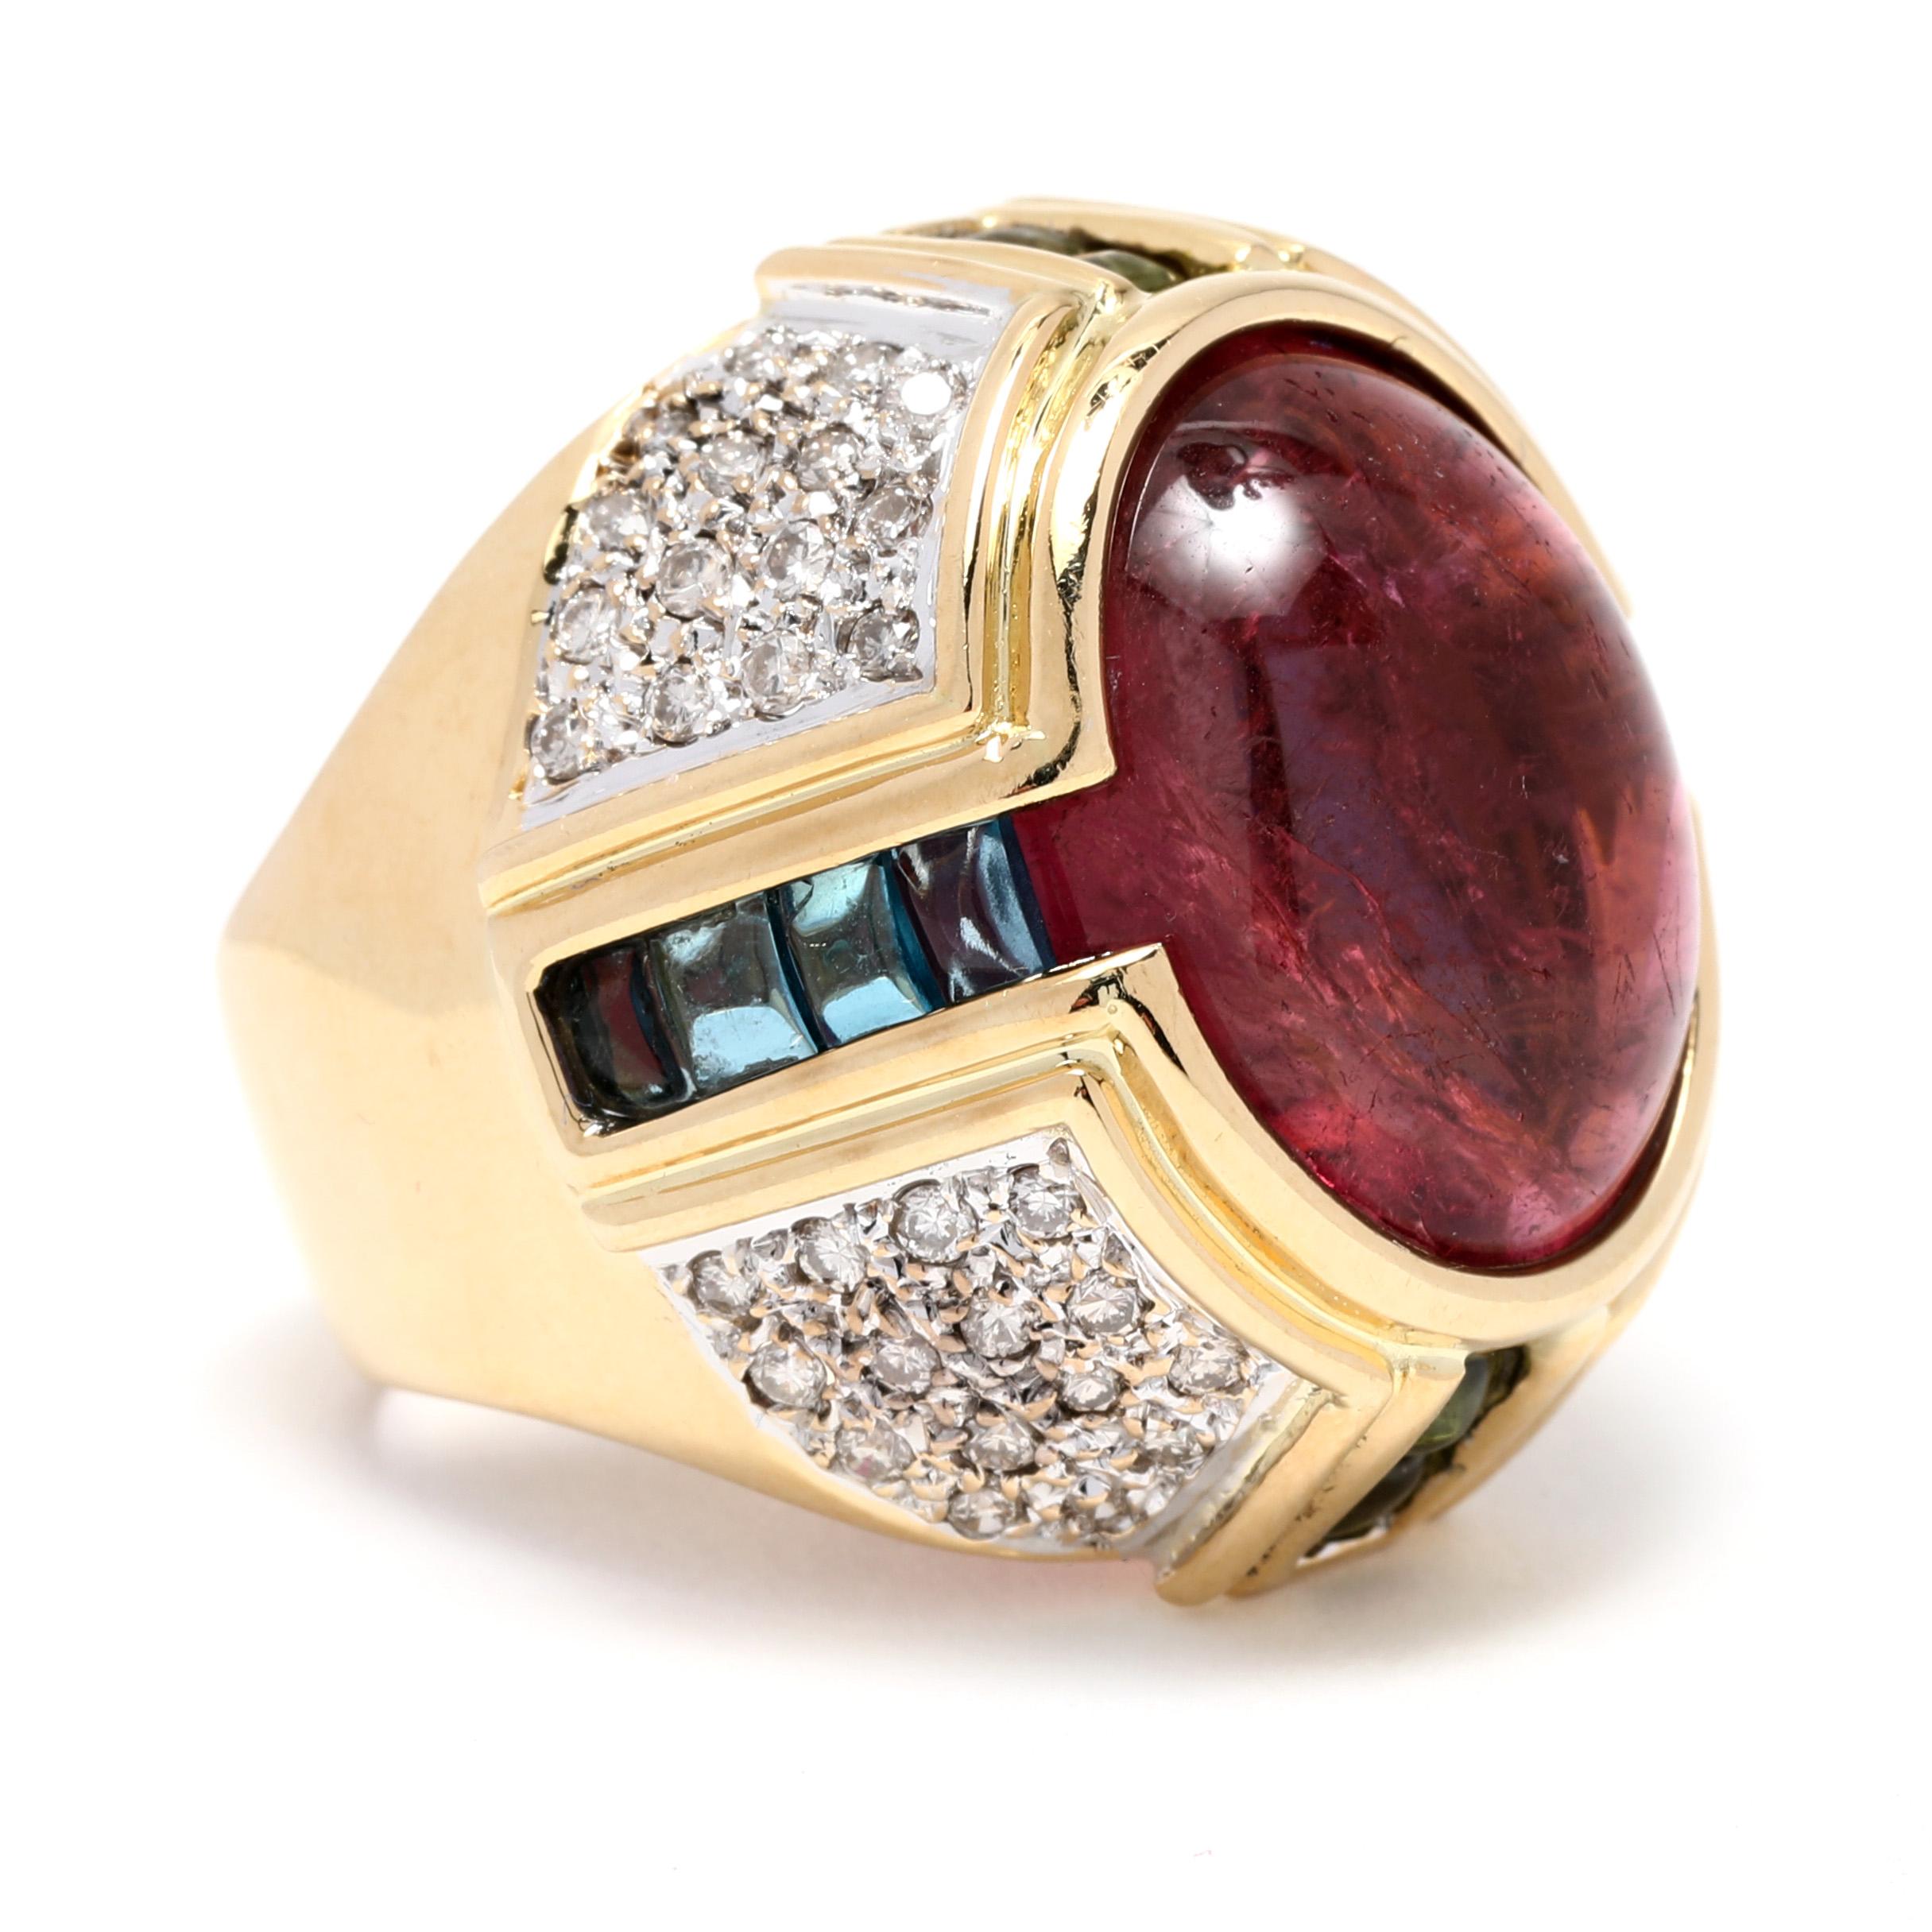 This stunning pink tourmaline and diamond gem-set cabochon cocktail ring is a one-of-a-kind piece. Crafted from 18K yellow gold, this unique cocktail ring features a large 22ctw pink tourmaline cabochon, which is encircled by a halo of sparkling